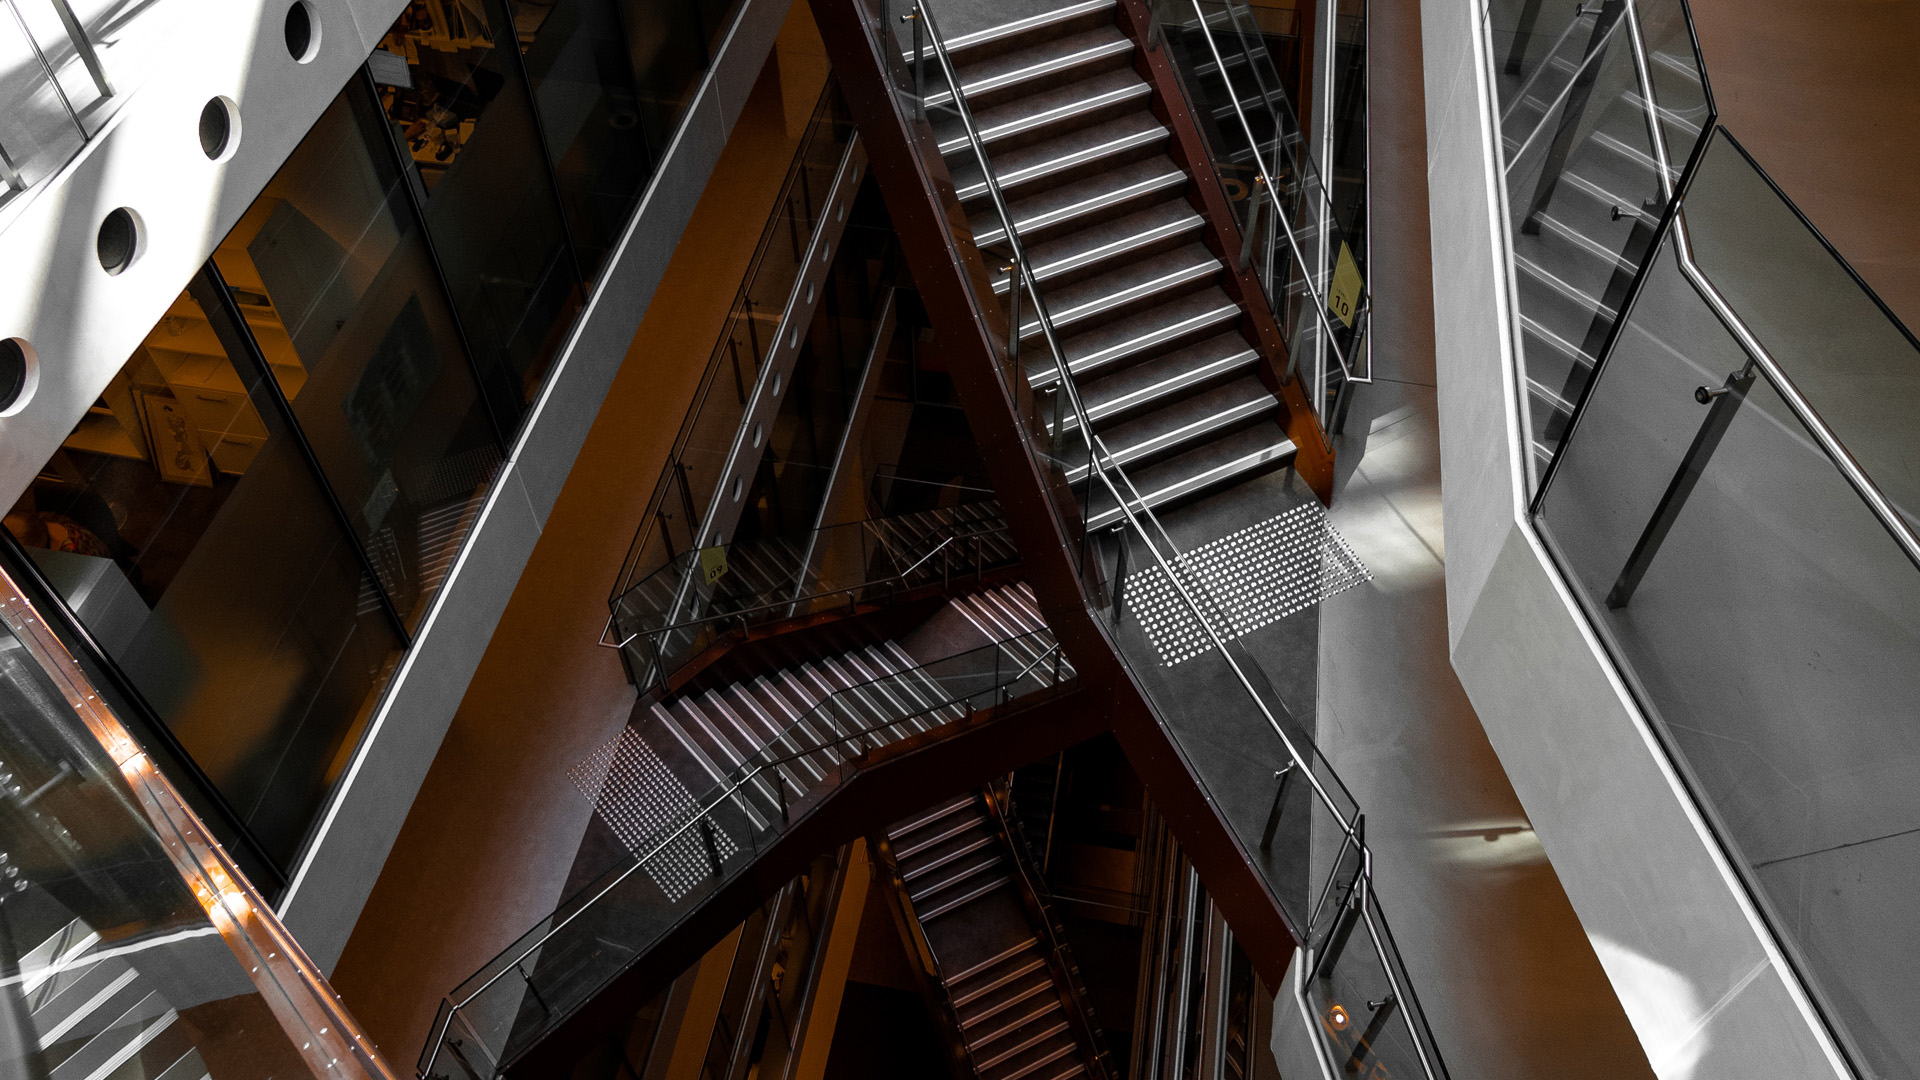 decorative image: staircases in a modern building overlapping